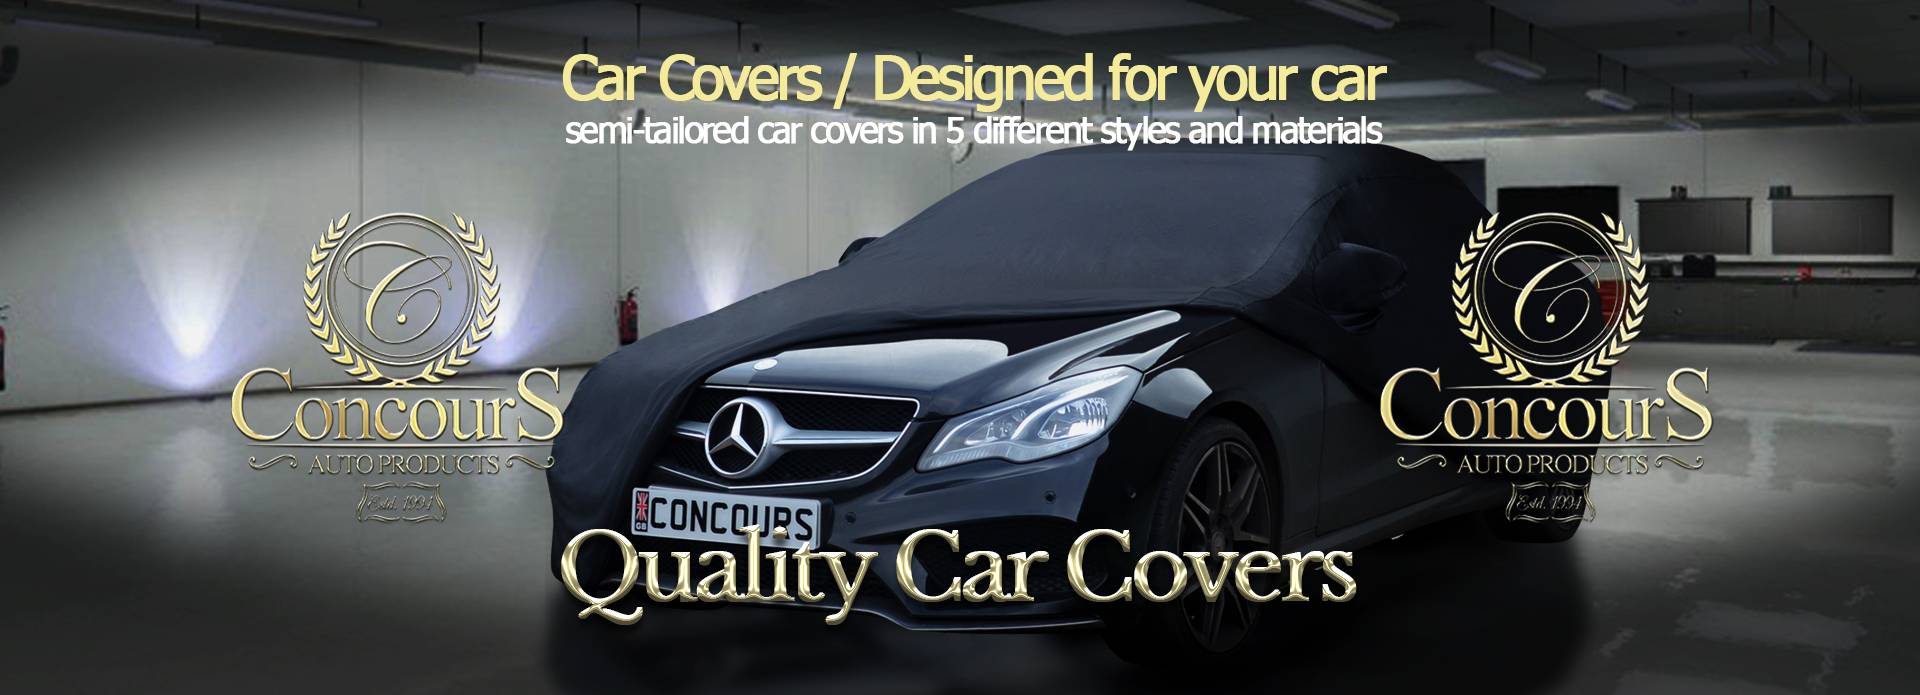 Welcome to Concours Auto Products